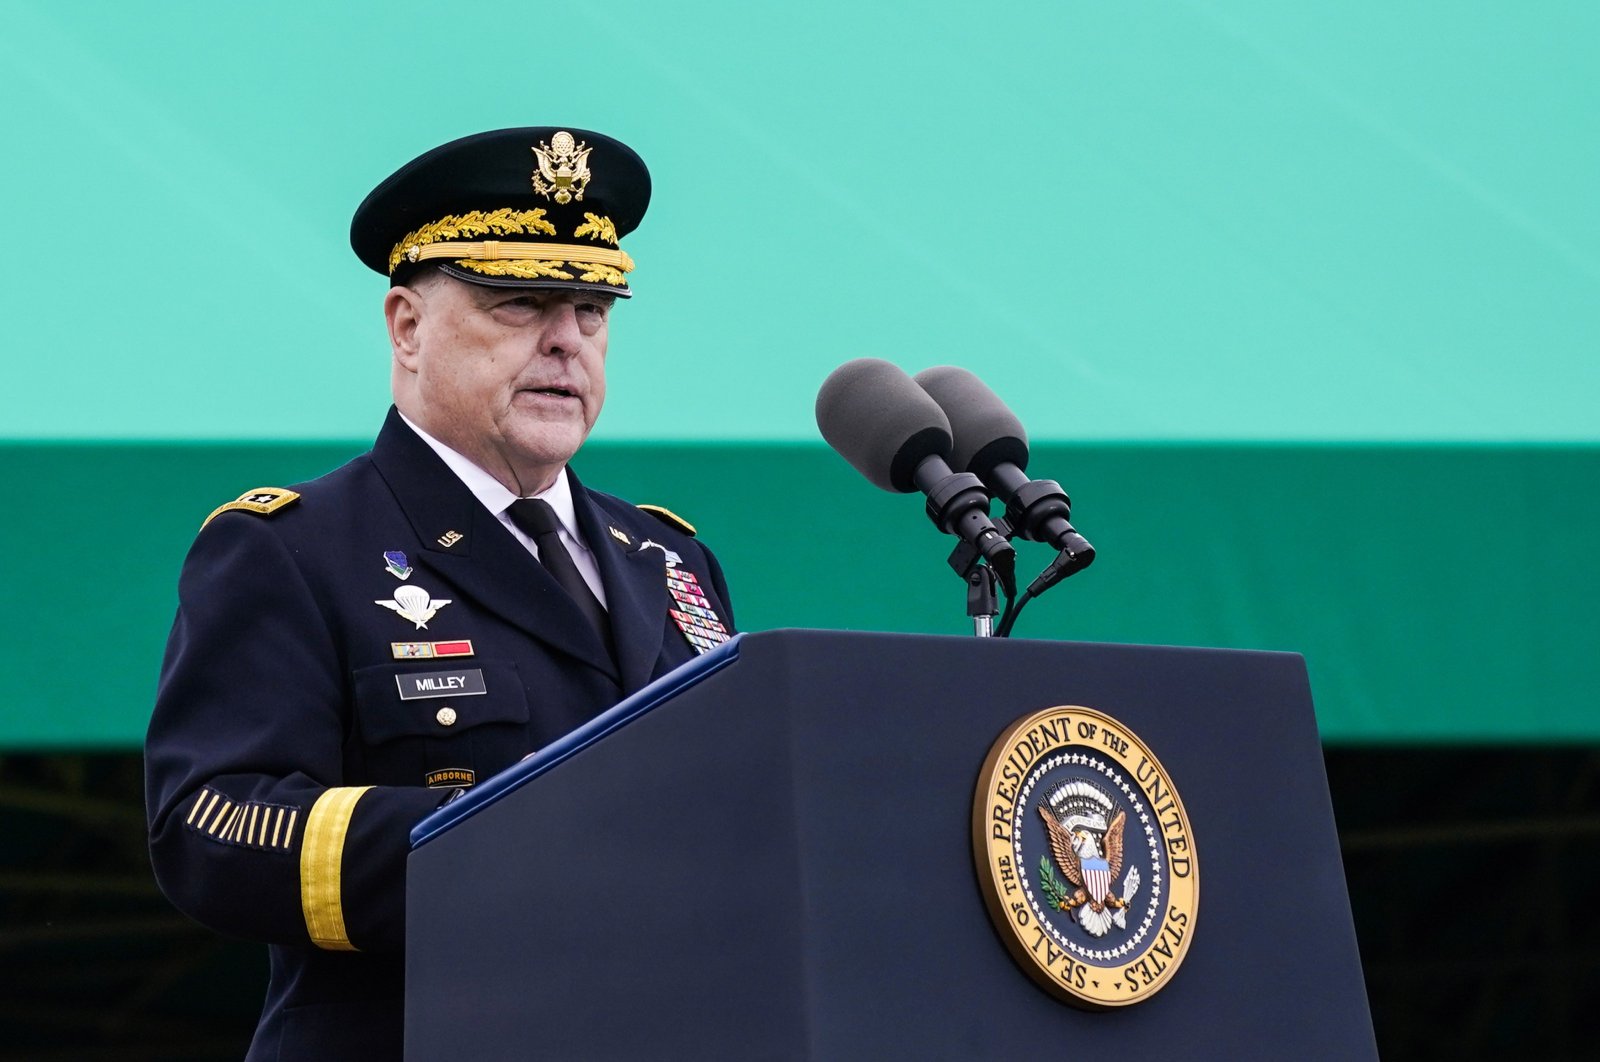 The 20th Chairman of the Joint Chiefs of Staff, General Mark A. Milley, speaks during a ceremony at the Armed Forces Farewell Tribute in his honor, and participates in an Armed Forces Hail in honor of General Charles Q. Brown, Jr., the 21st Chairman of the Joint Chiefs of Staff, at Joint Base Myer-Henderson Hall, Arlington, Virginia, D.C., Sept. 29, 2023. (EPA Photo)